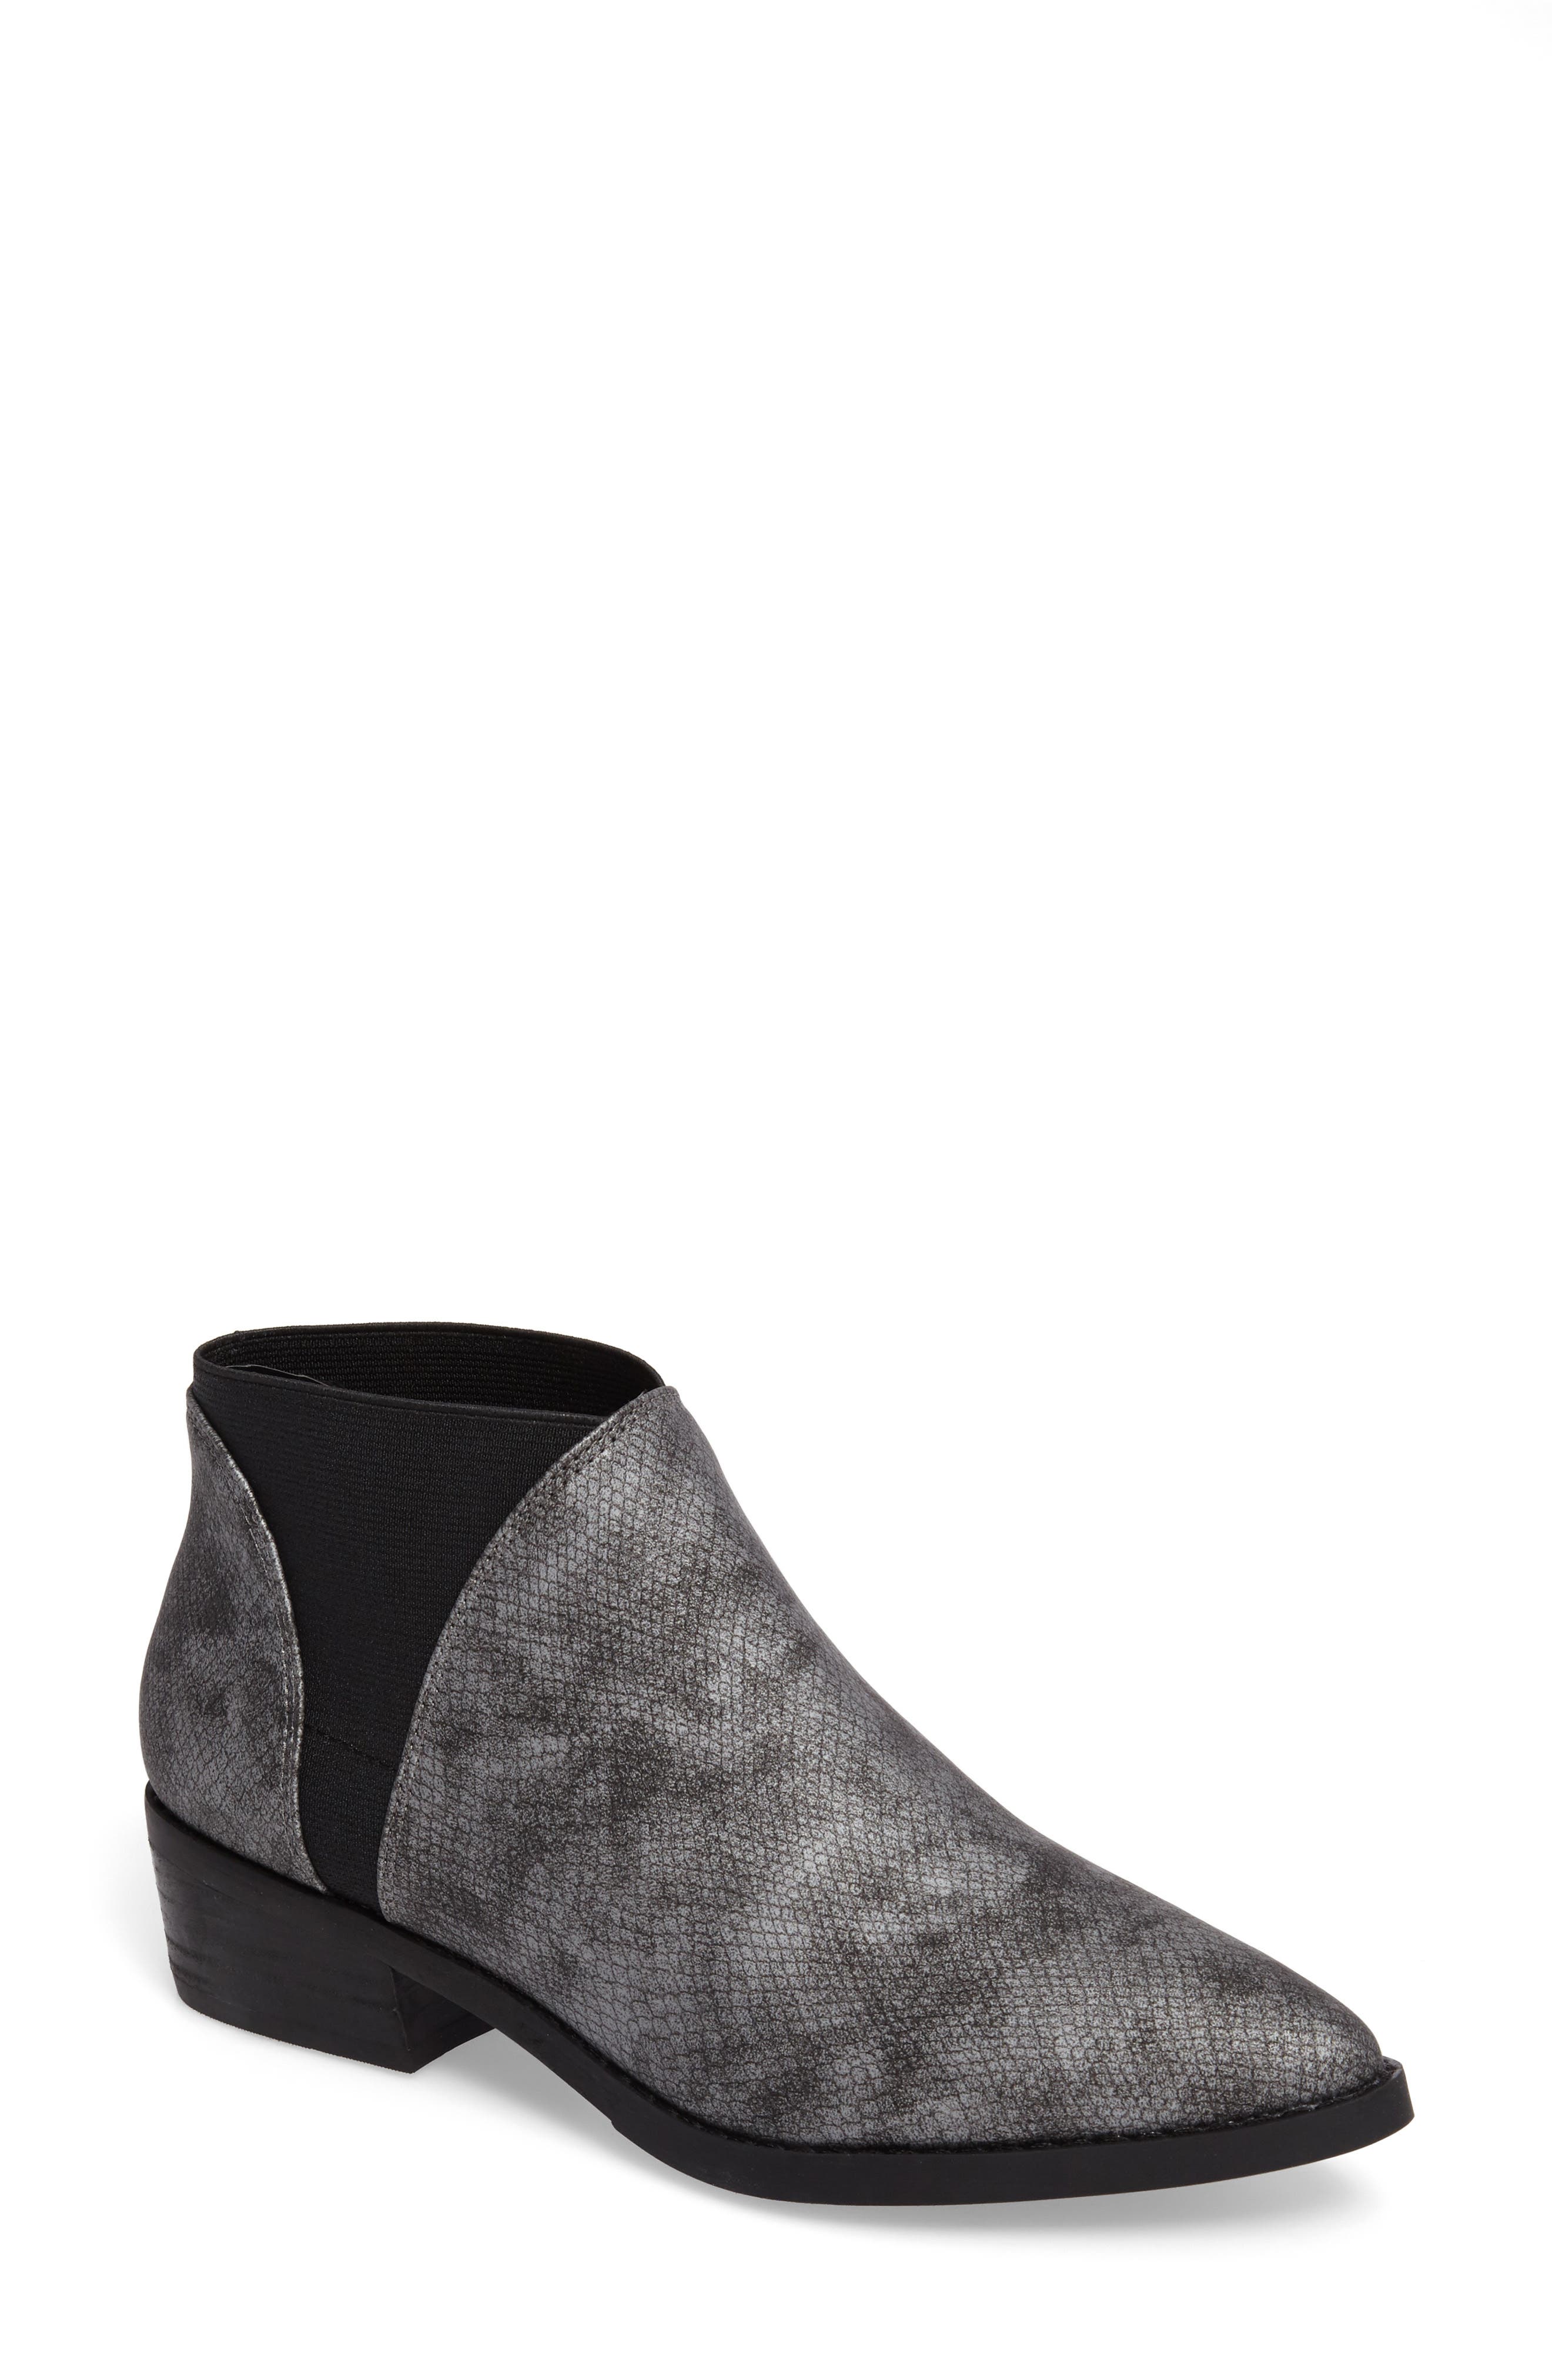 Matisse | Ester Faux Suede Ankle Boot 